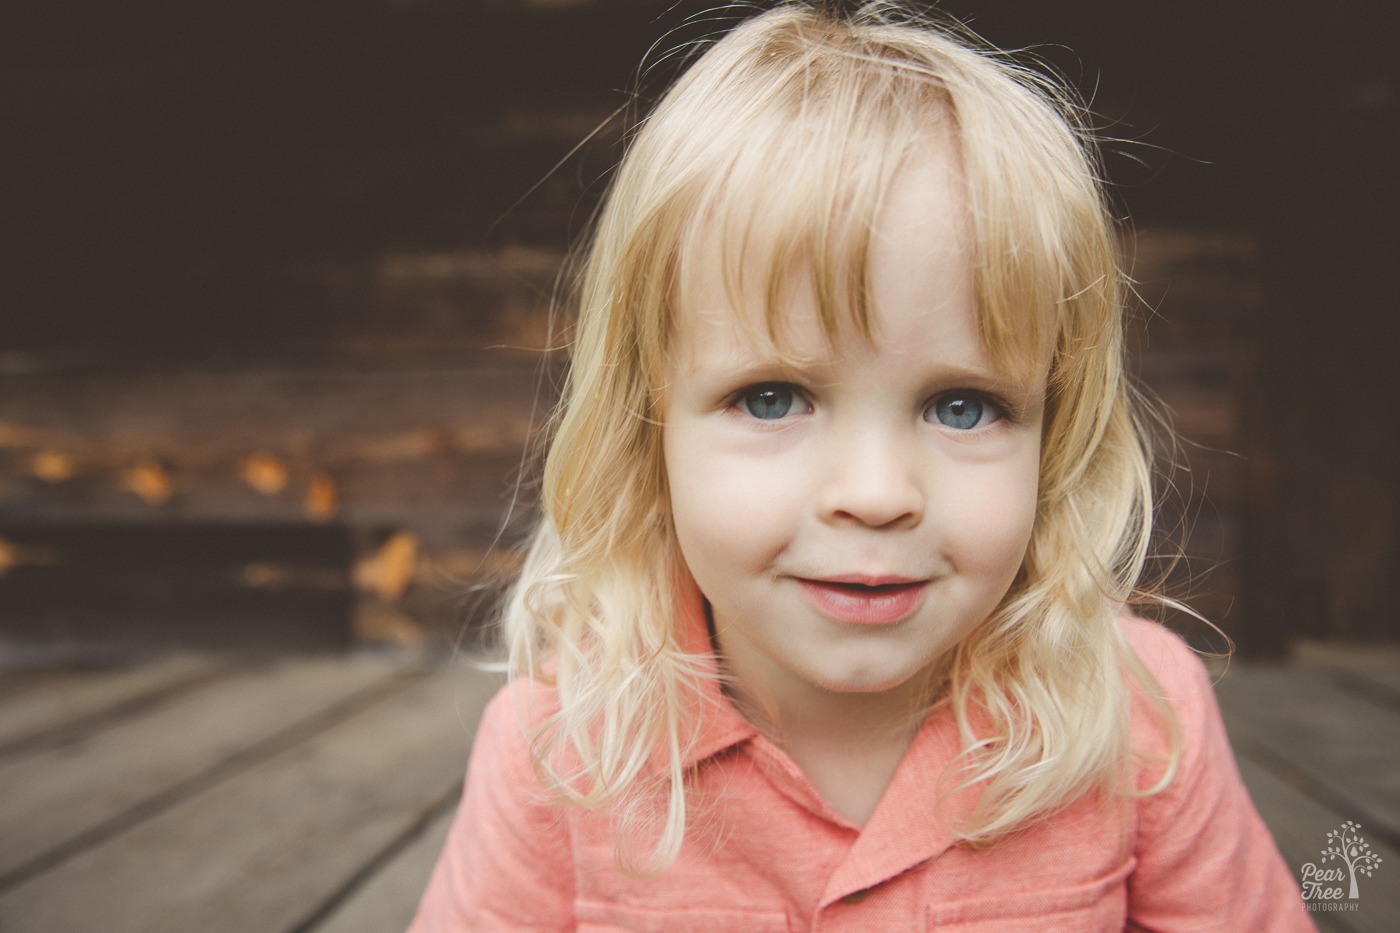 Close up of a cute three year old boy with long blond hair and blue eyes smiling sweetly